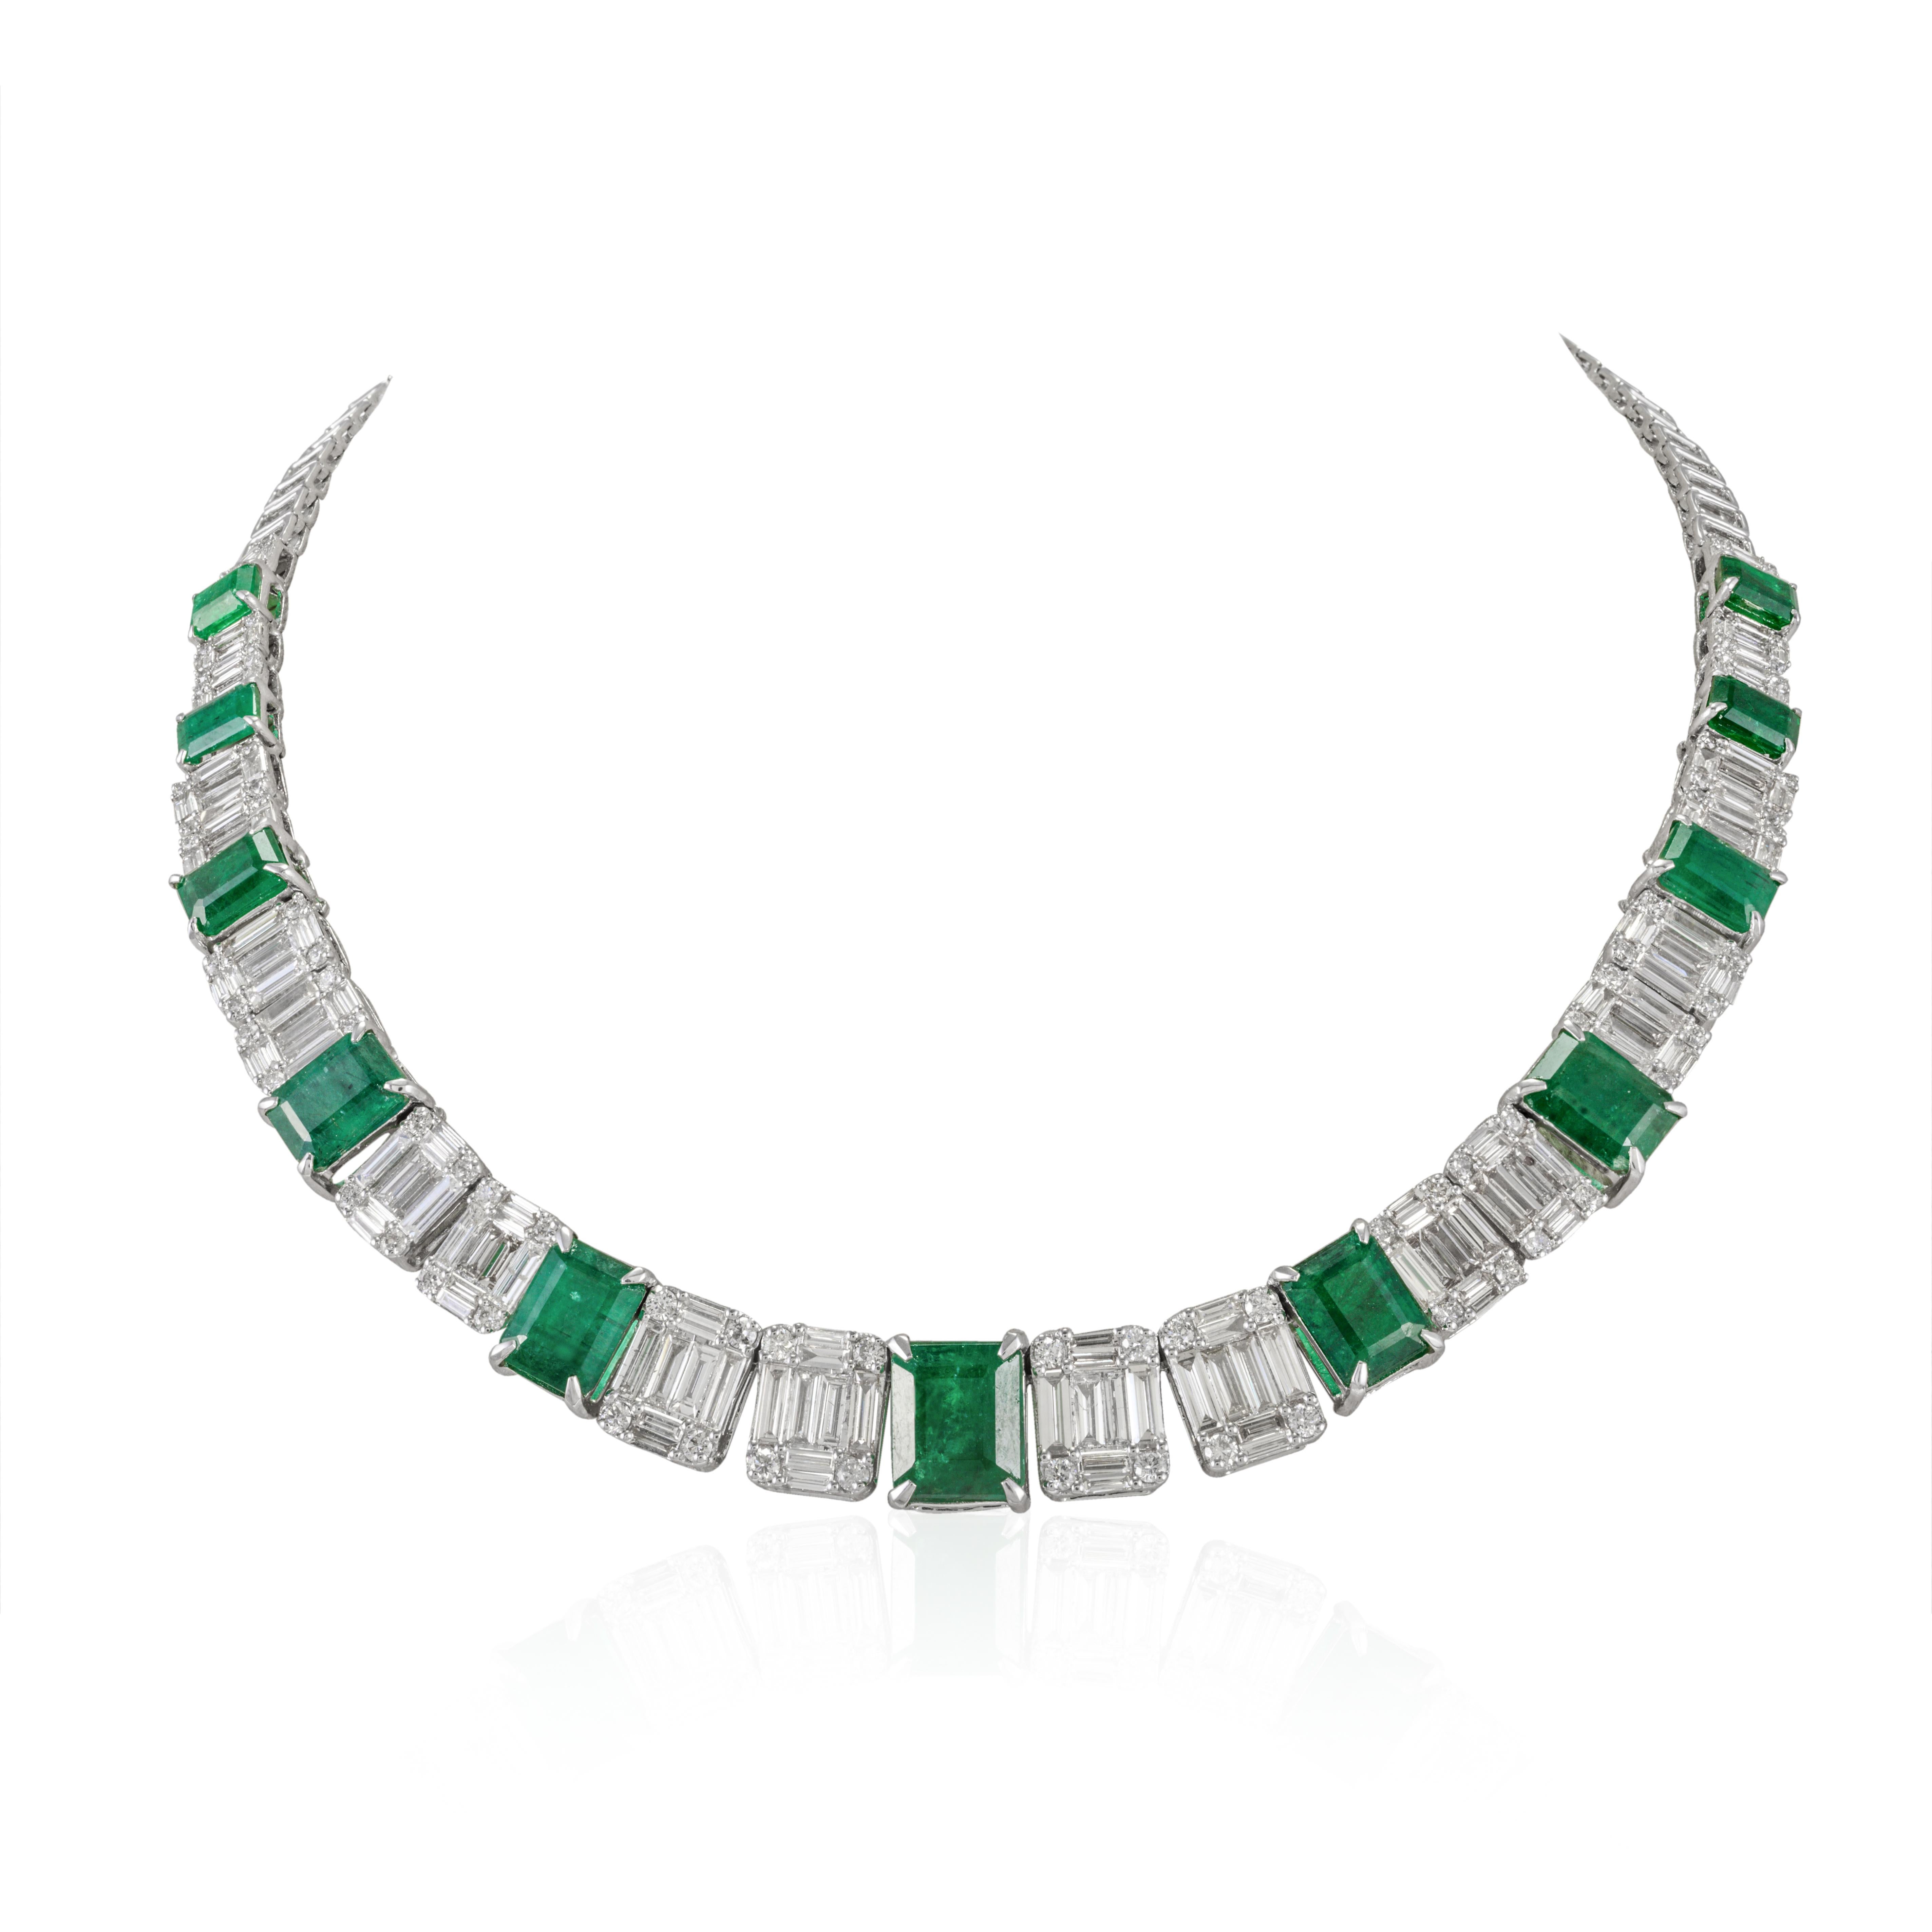 Octagon Cut 19.11 CTW Vivid Emerald and 8.82 CTW Diamond Tennis Necklace 18k White Gold For Sale